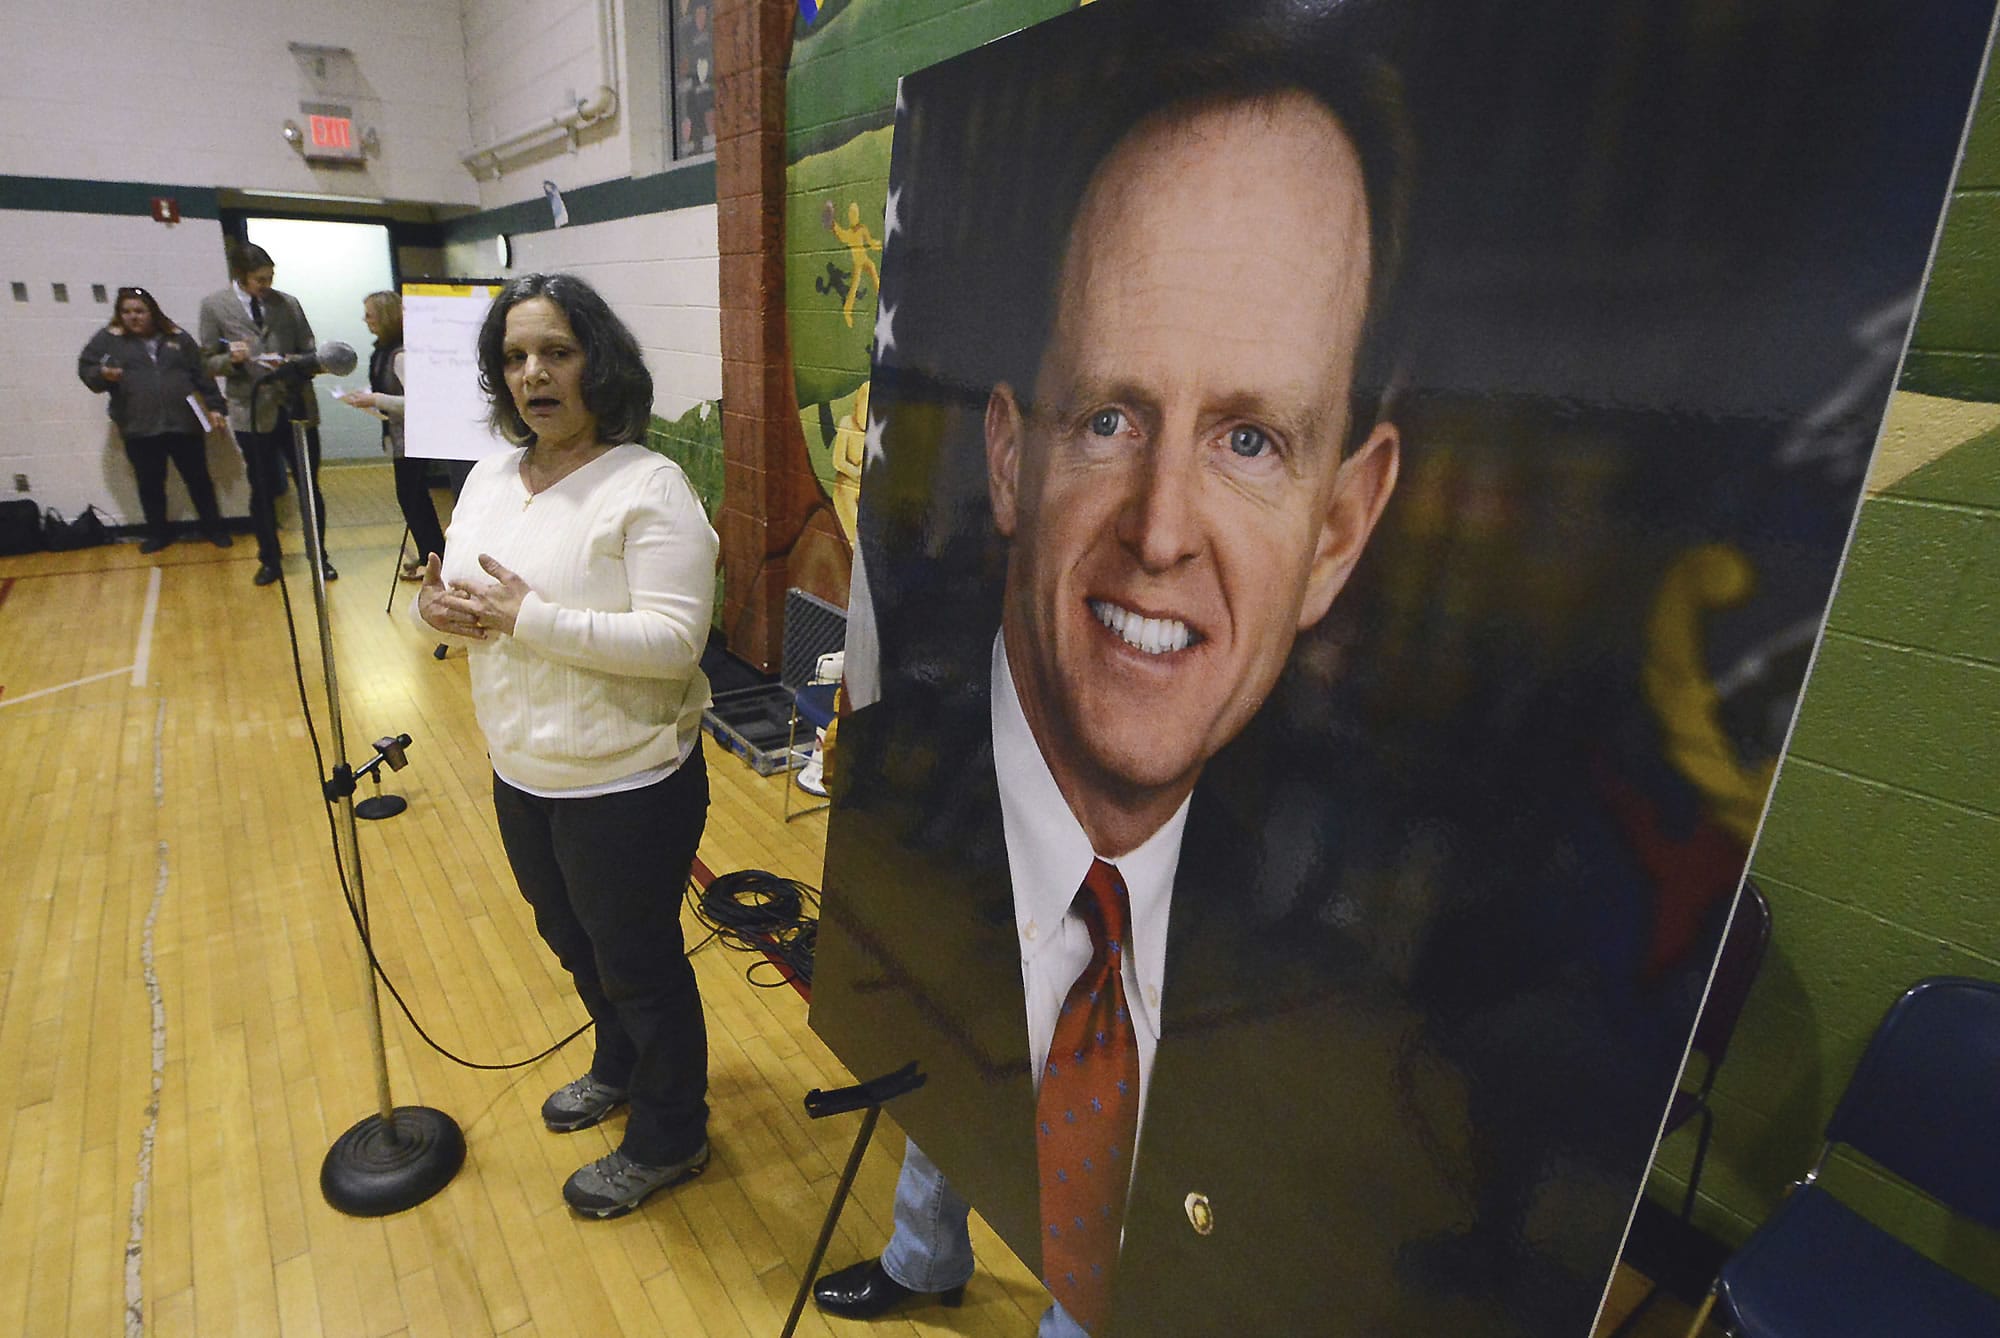 Anna Washick, of Thornhurst, Pa., tells her story regarding health care next to a large photograph of Sen. Pat Toomey, R-Pa., at the United Neighborhood Center in Scranton, Pa., Tuesday, Feb. 21, 2017. Toomey was invited to speak at the town hall, but did not attend.